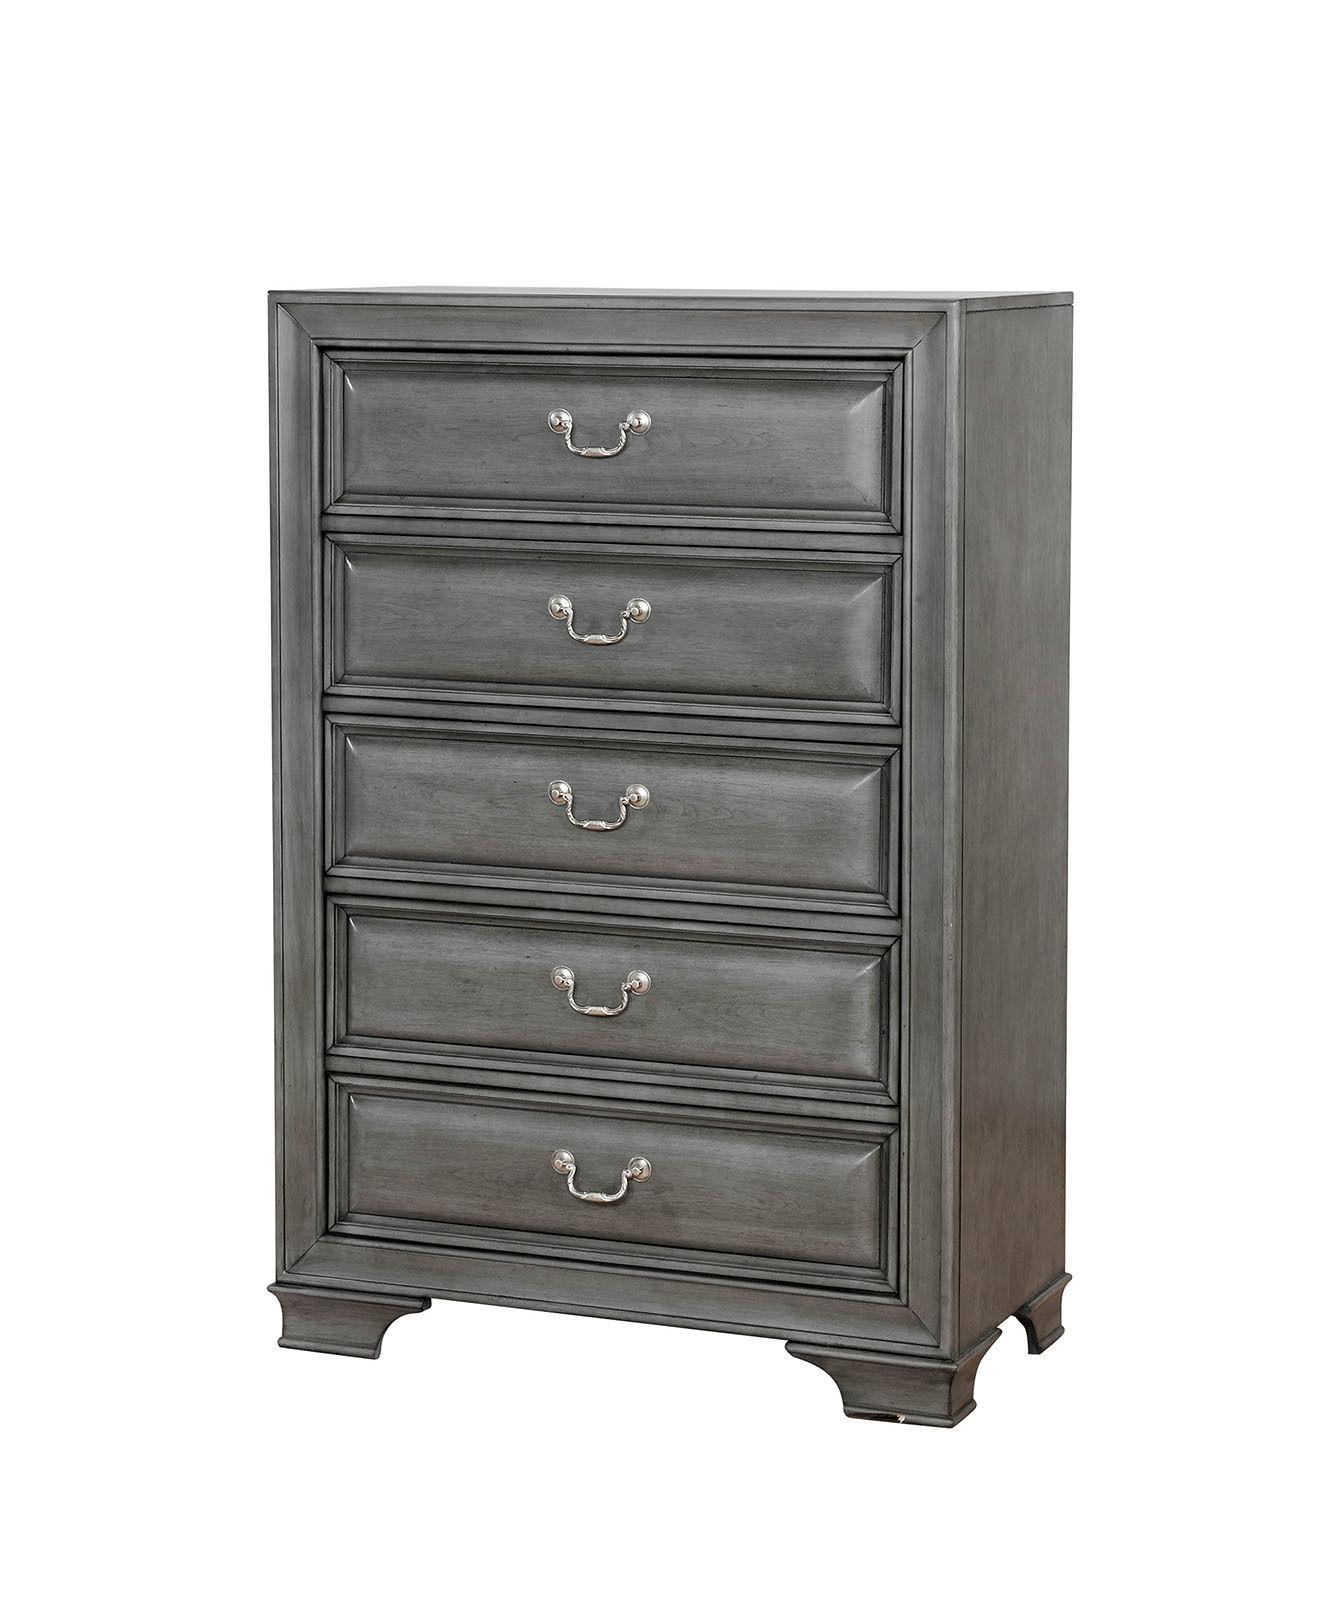 Transitional Chest CM7302GY-C Brandt CM7302GY-C in Gray 